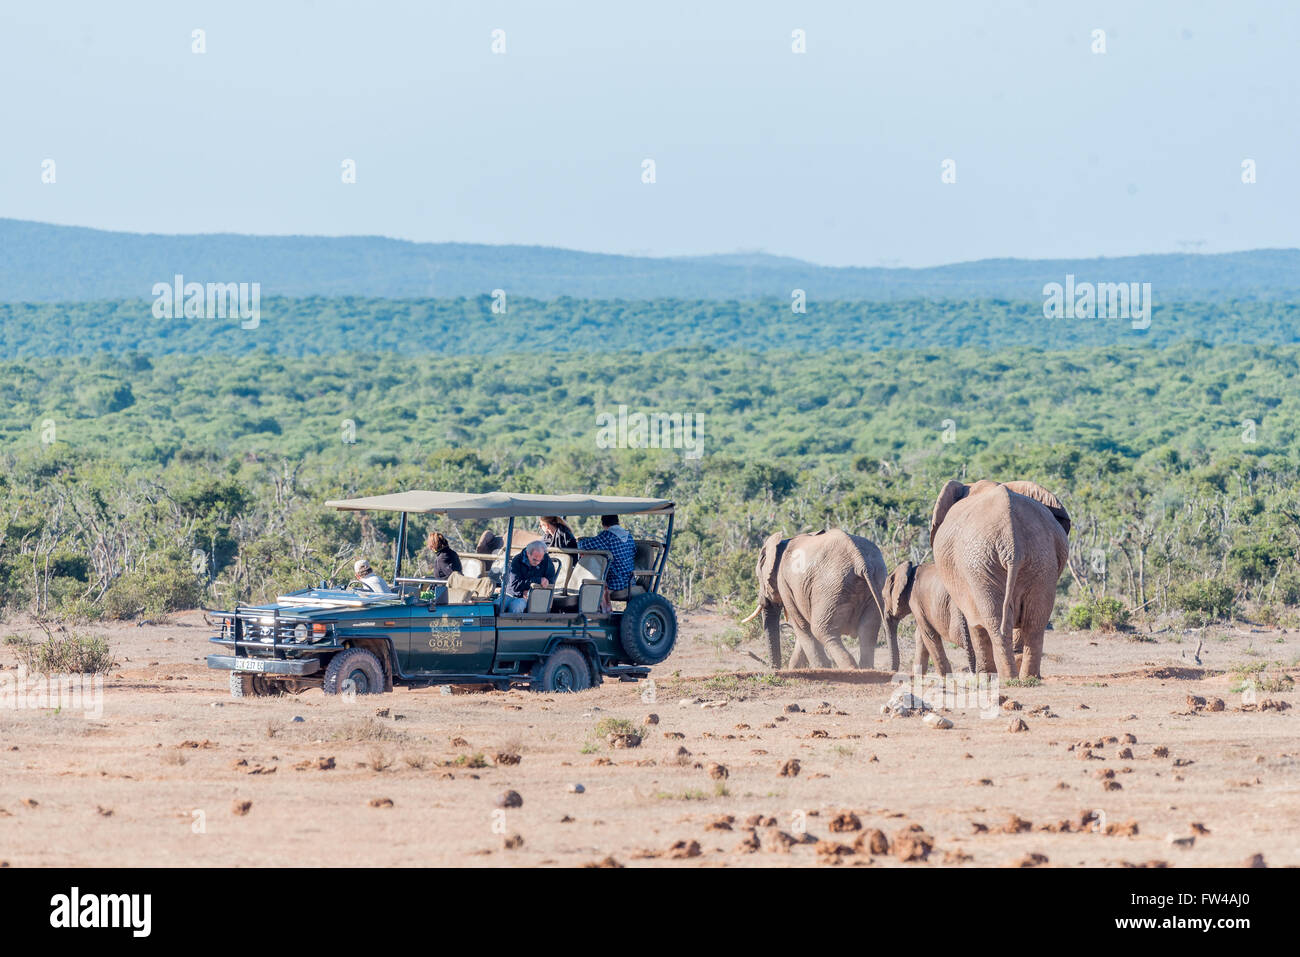 ADDO ELEPHANT NATIONAL PARK, SOUTH AFRICA - FEBRUARY 23, 2016: Unidentified tourists on a safari vehicle in a close encounter wi Stock Photo